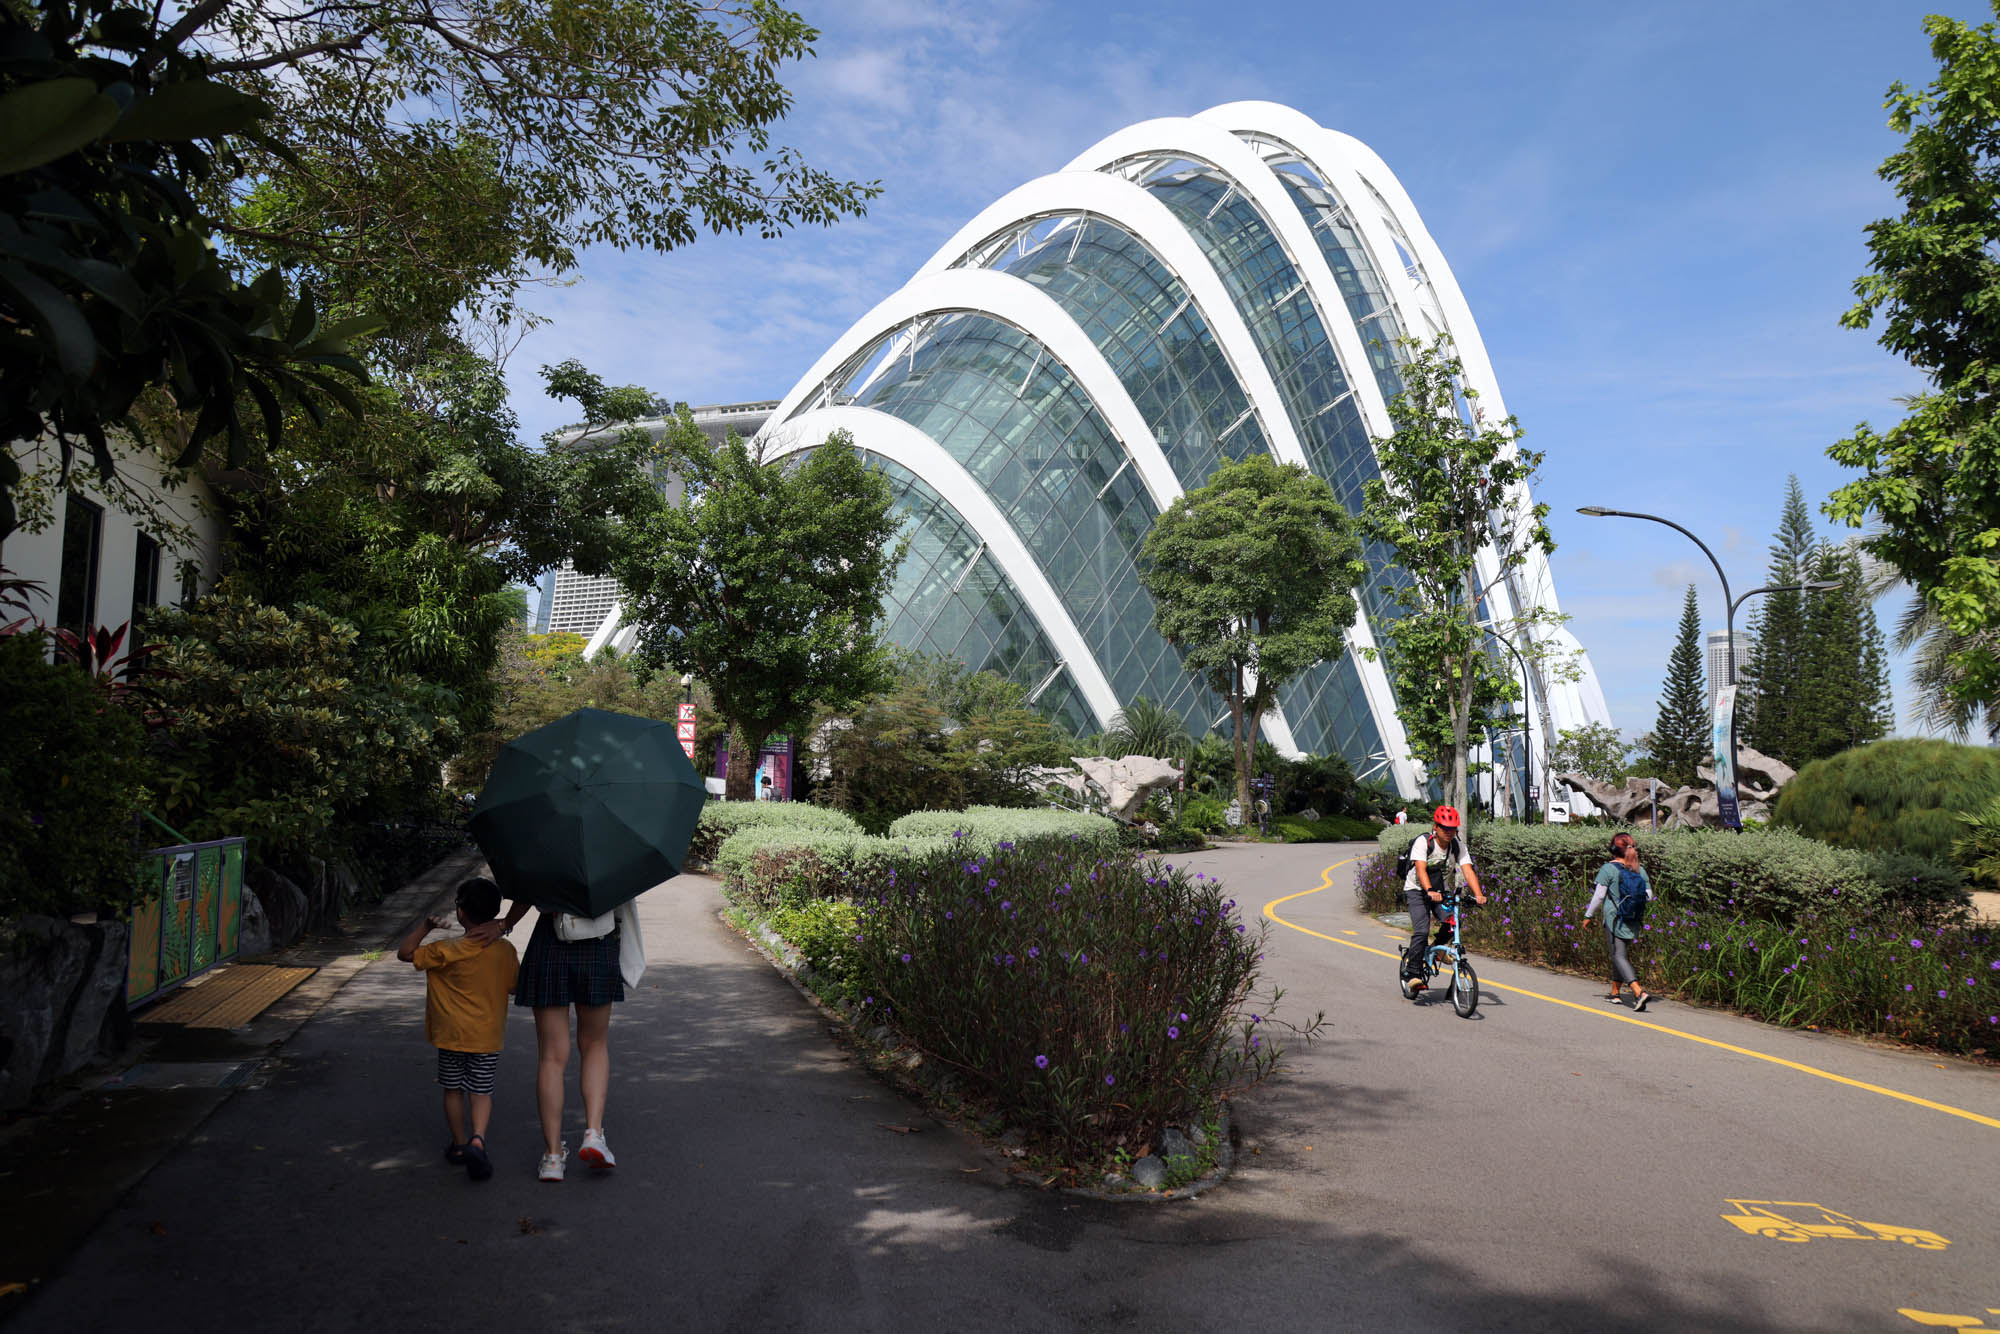 bill-hocker-cloud-forest-dome-gardens-by-the-bay-singapore-2022